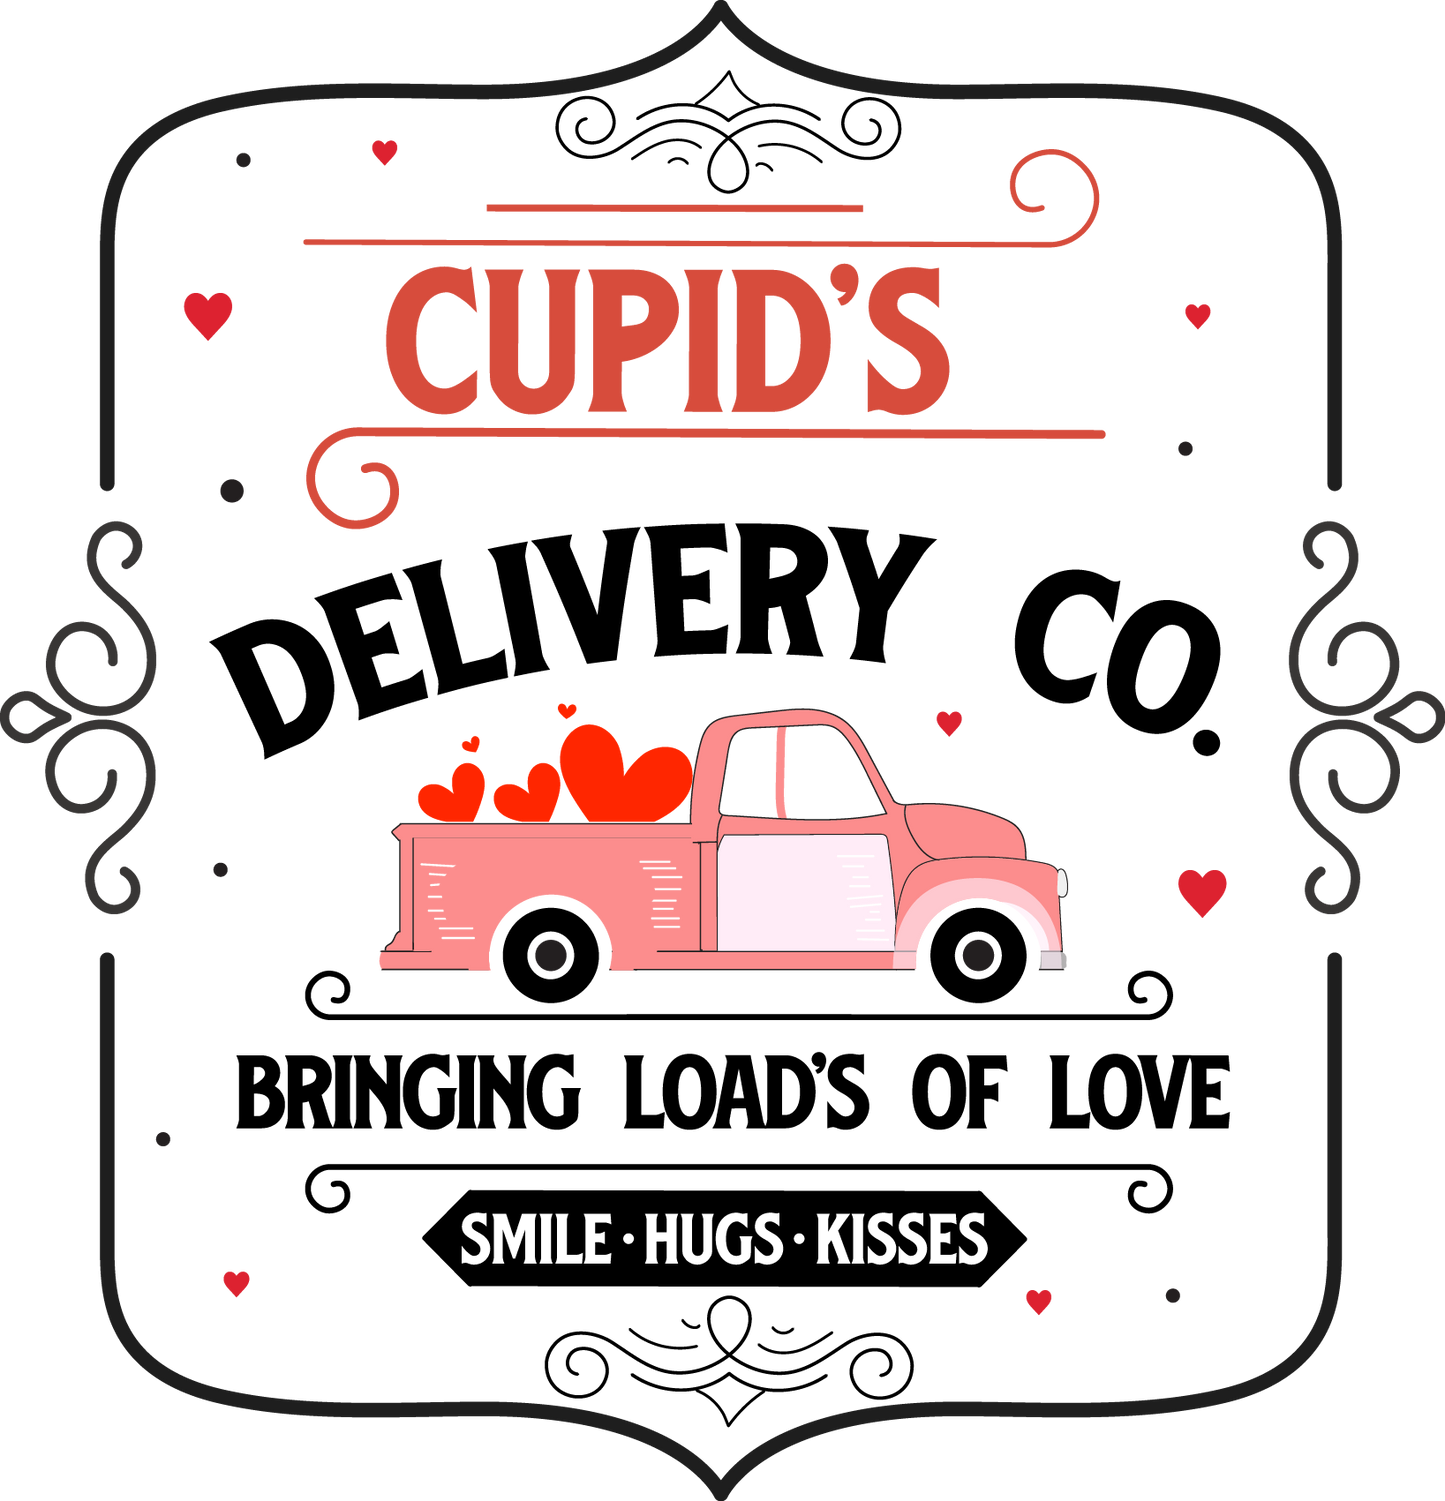 VALENTINE'S DAY PRINT 19 - CUPIDS DELIVERY